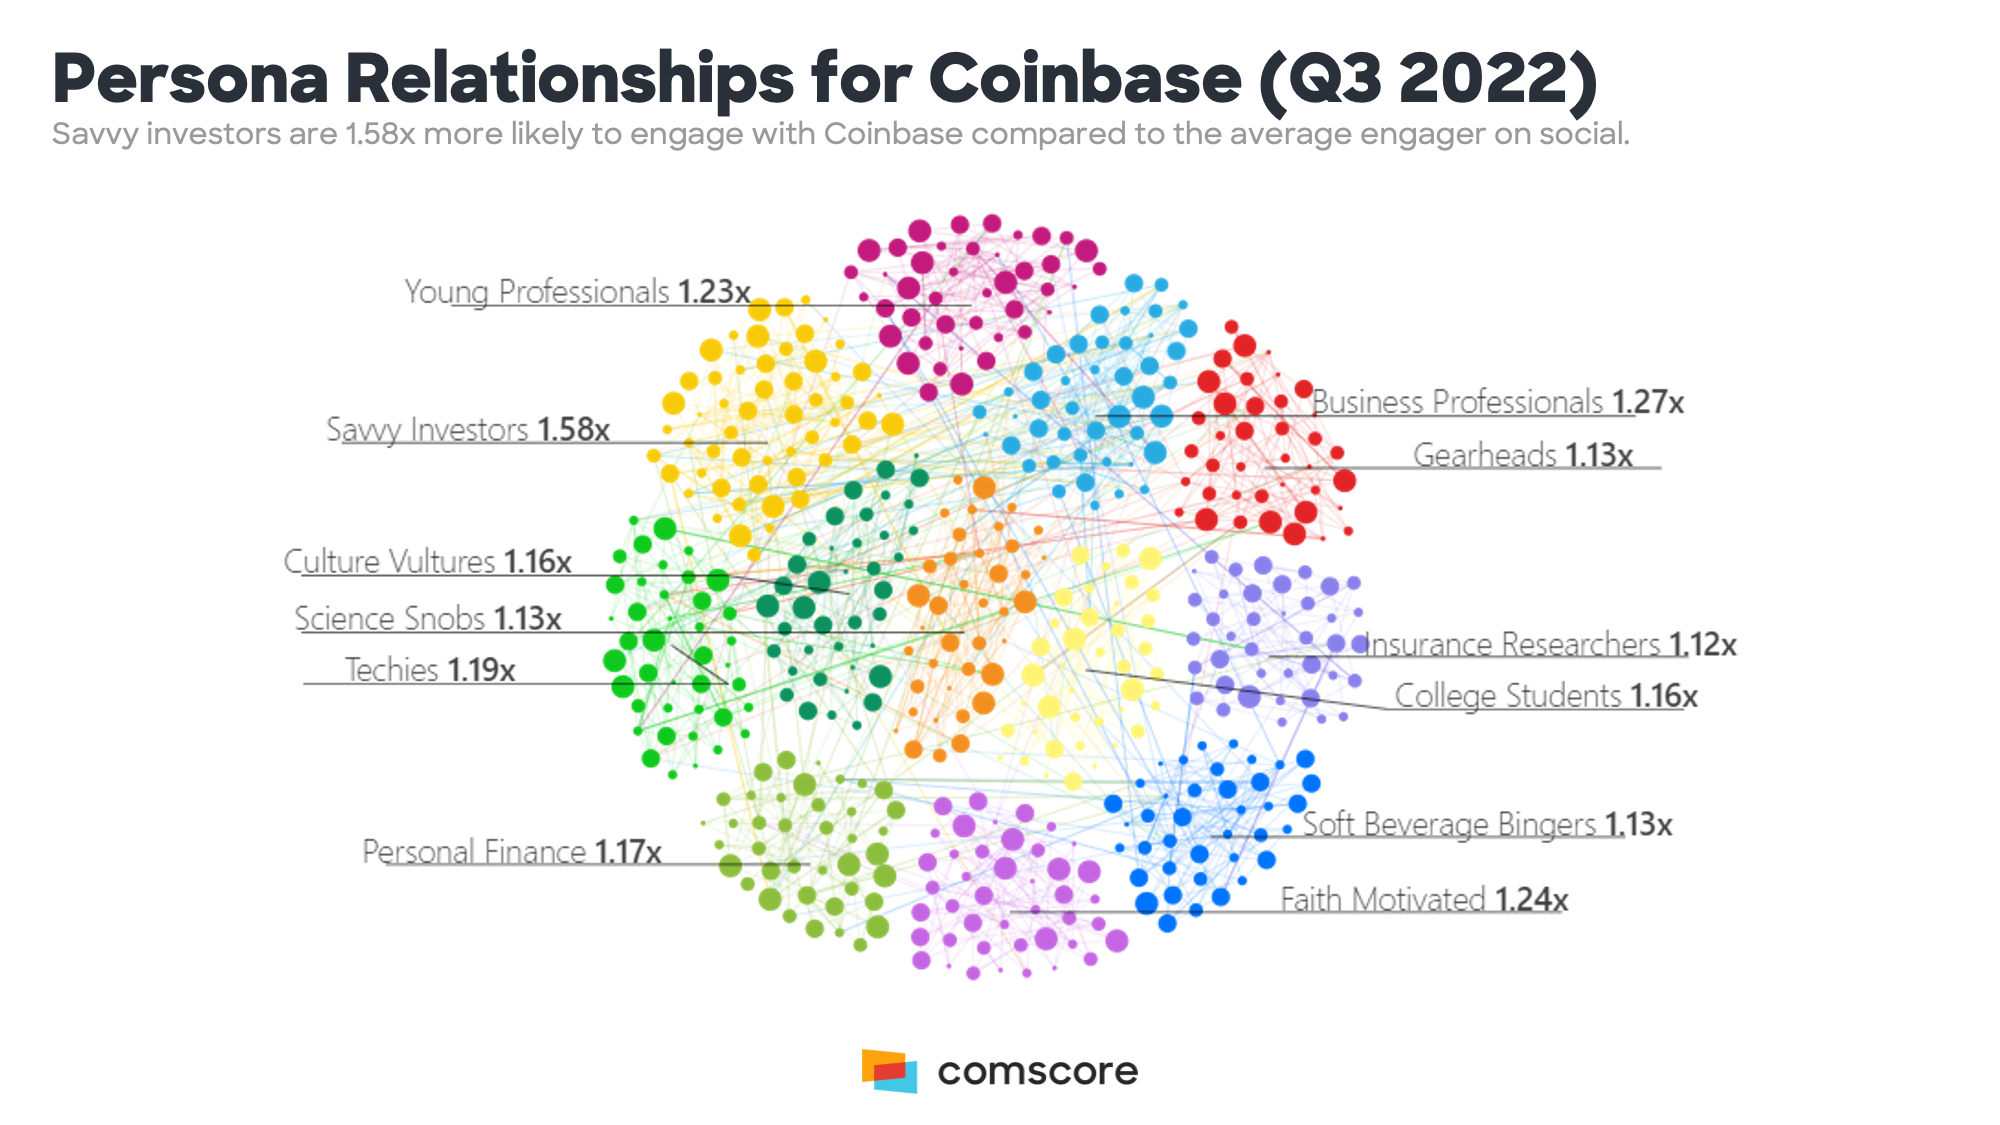 Persona Relationships for Coinbase (Q3 2022)